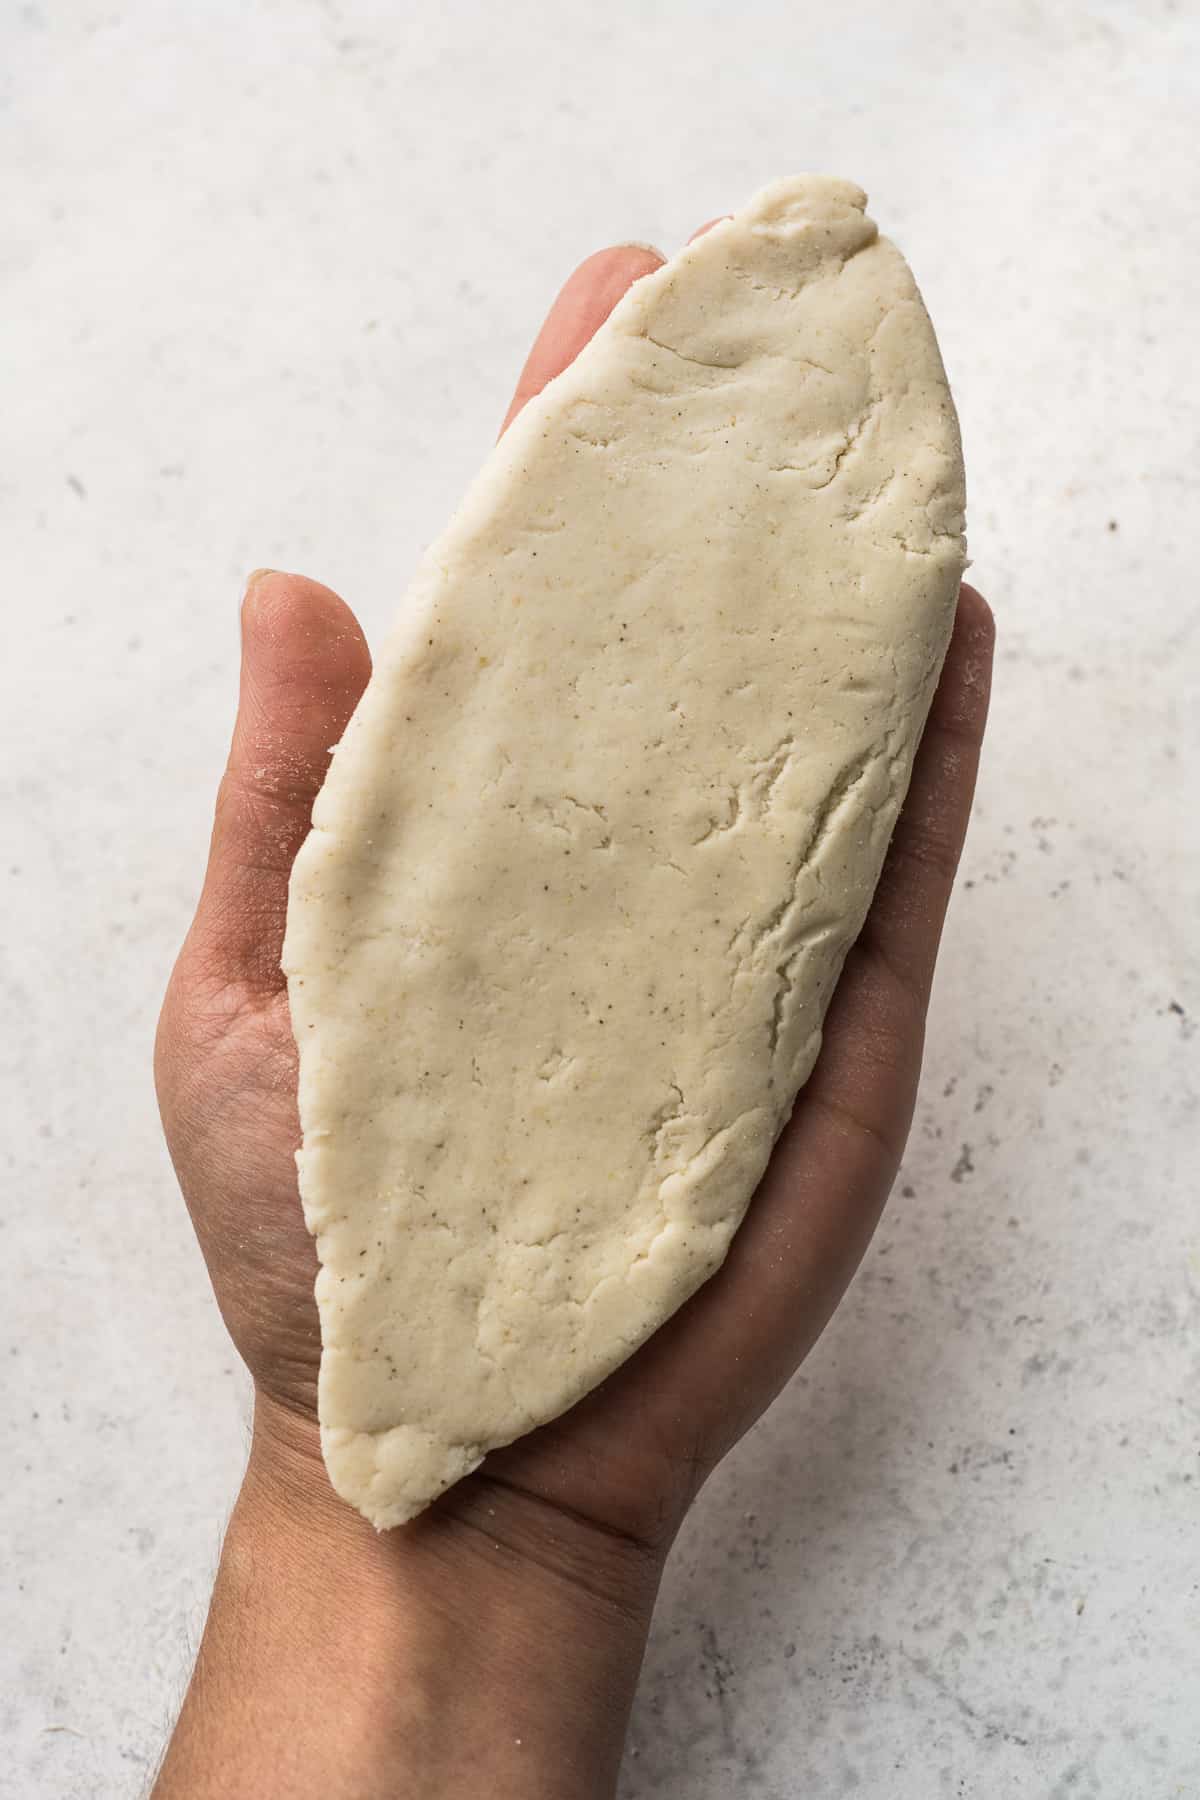 A shaped tlacoyo in the palm of a hand.